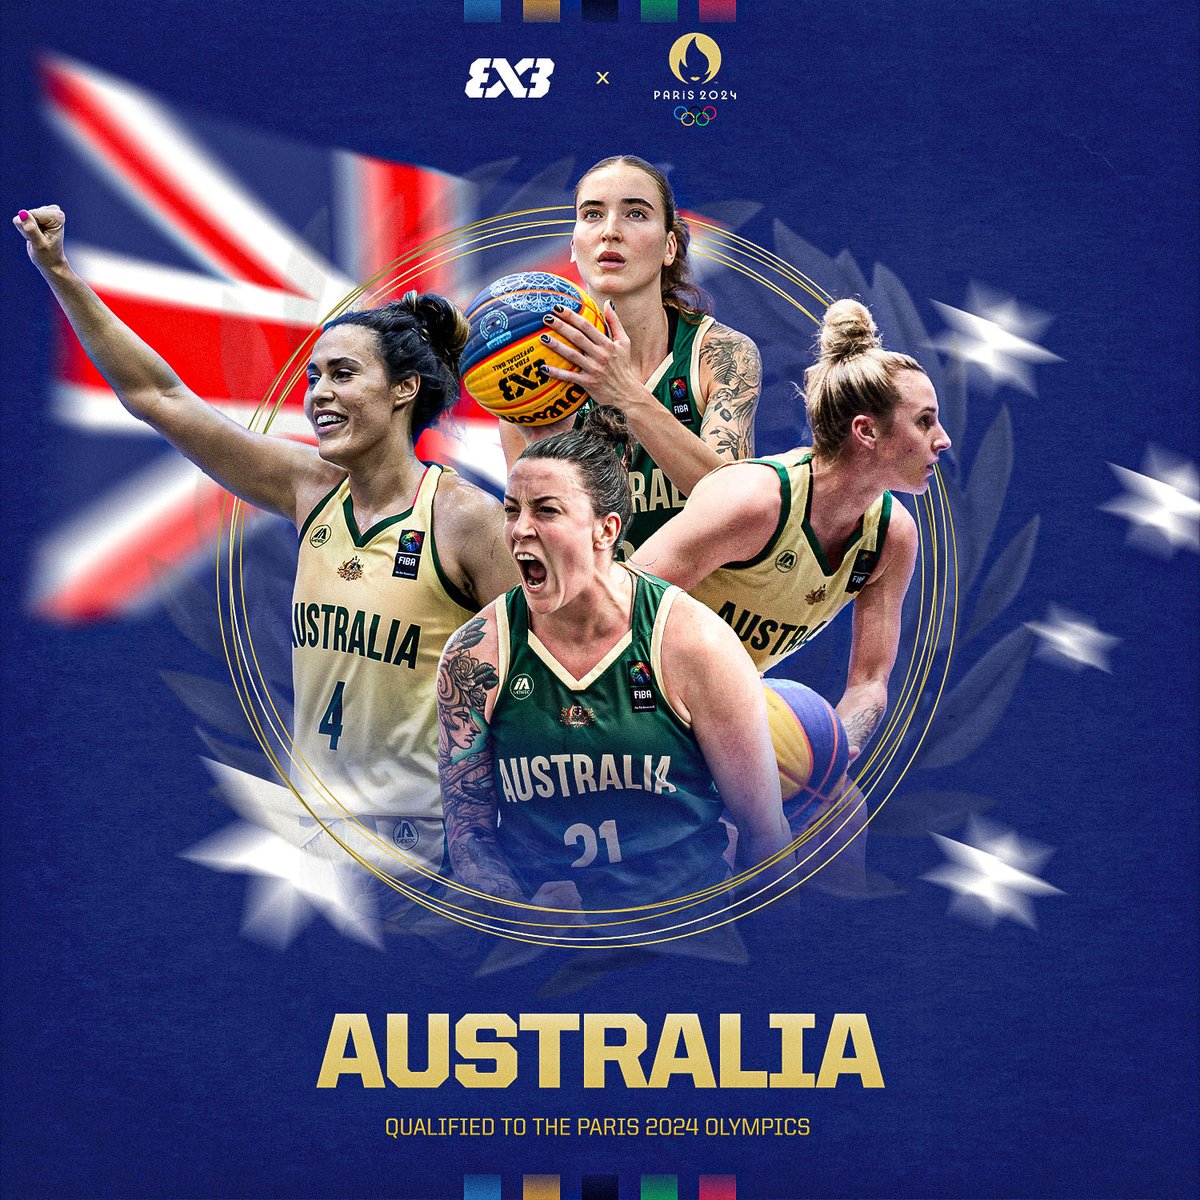 🇦🇺 The Aussies are headed to #Paris2024! 🤩 #3x3OQT x @BasketballAus